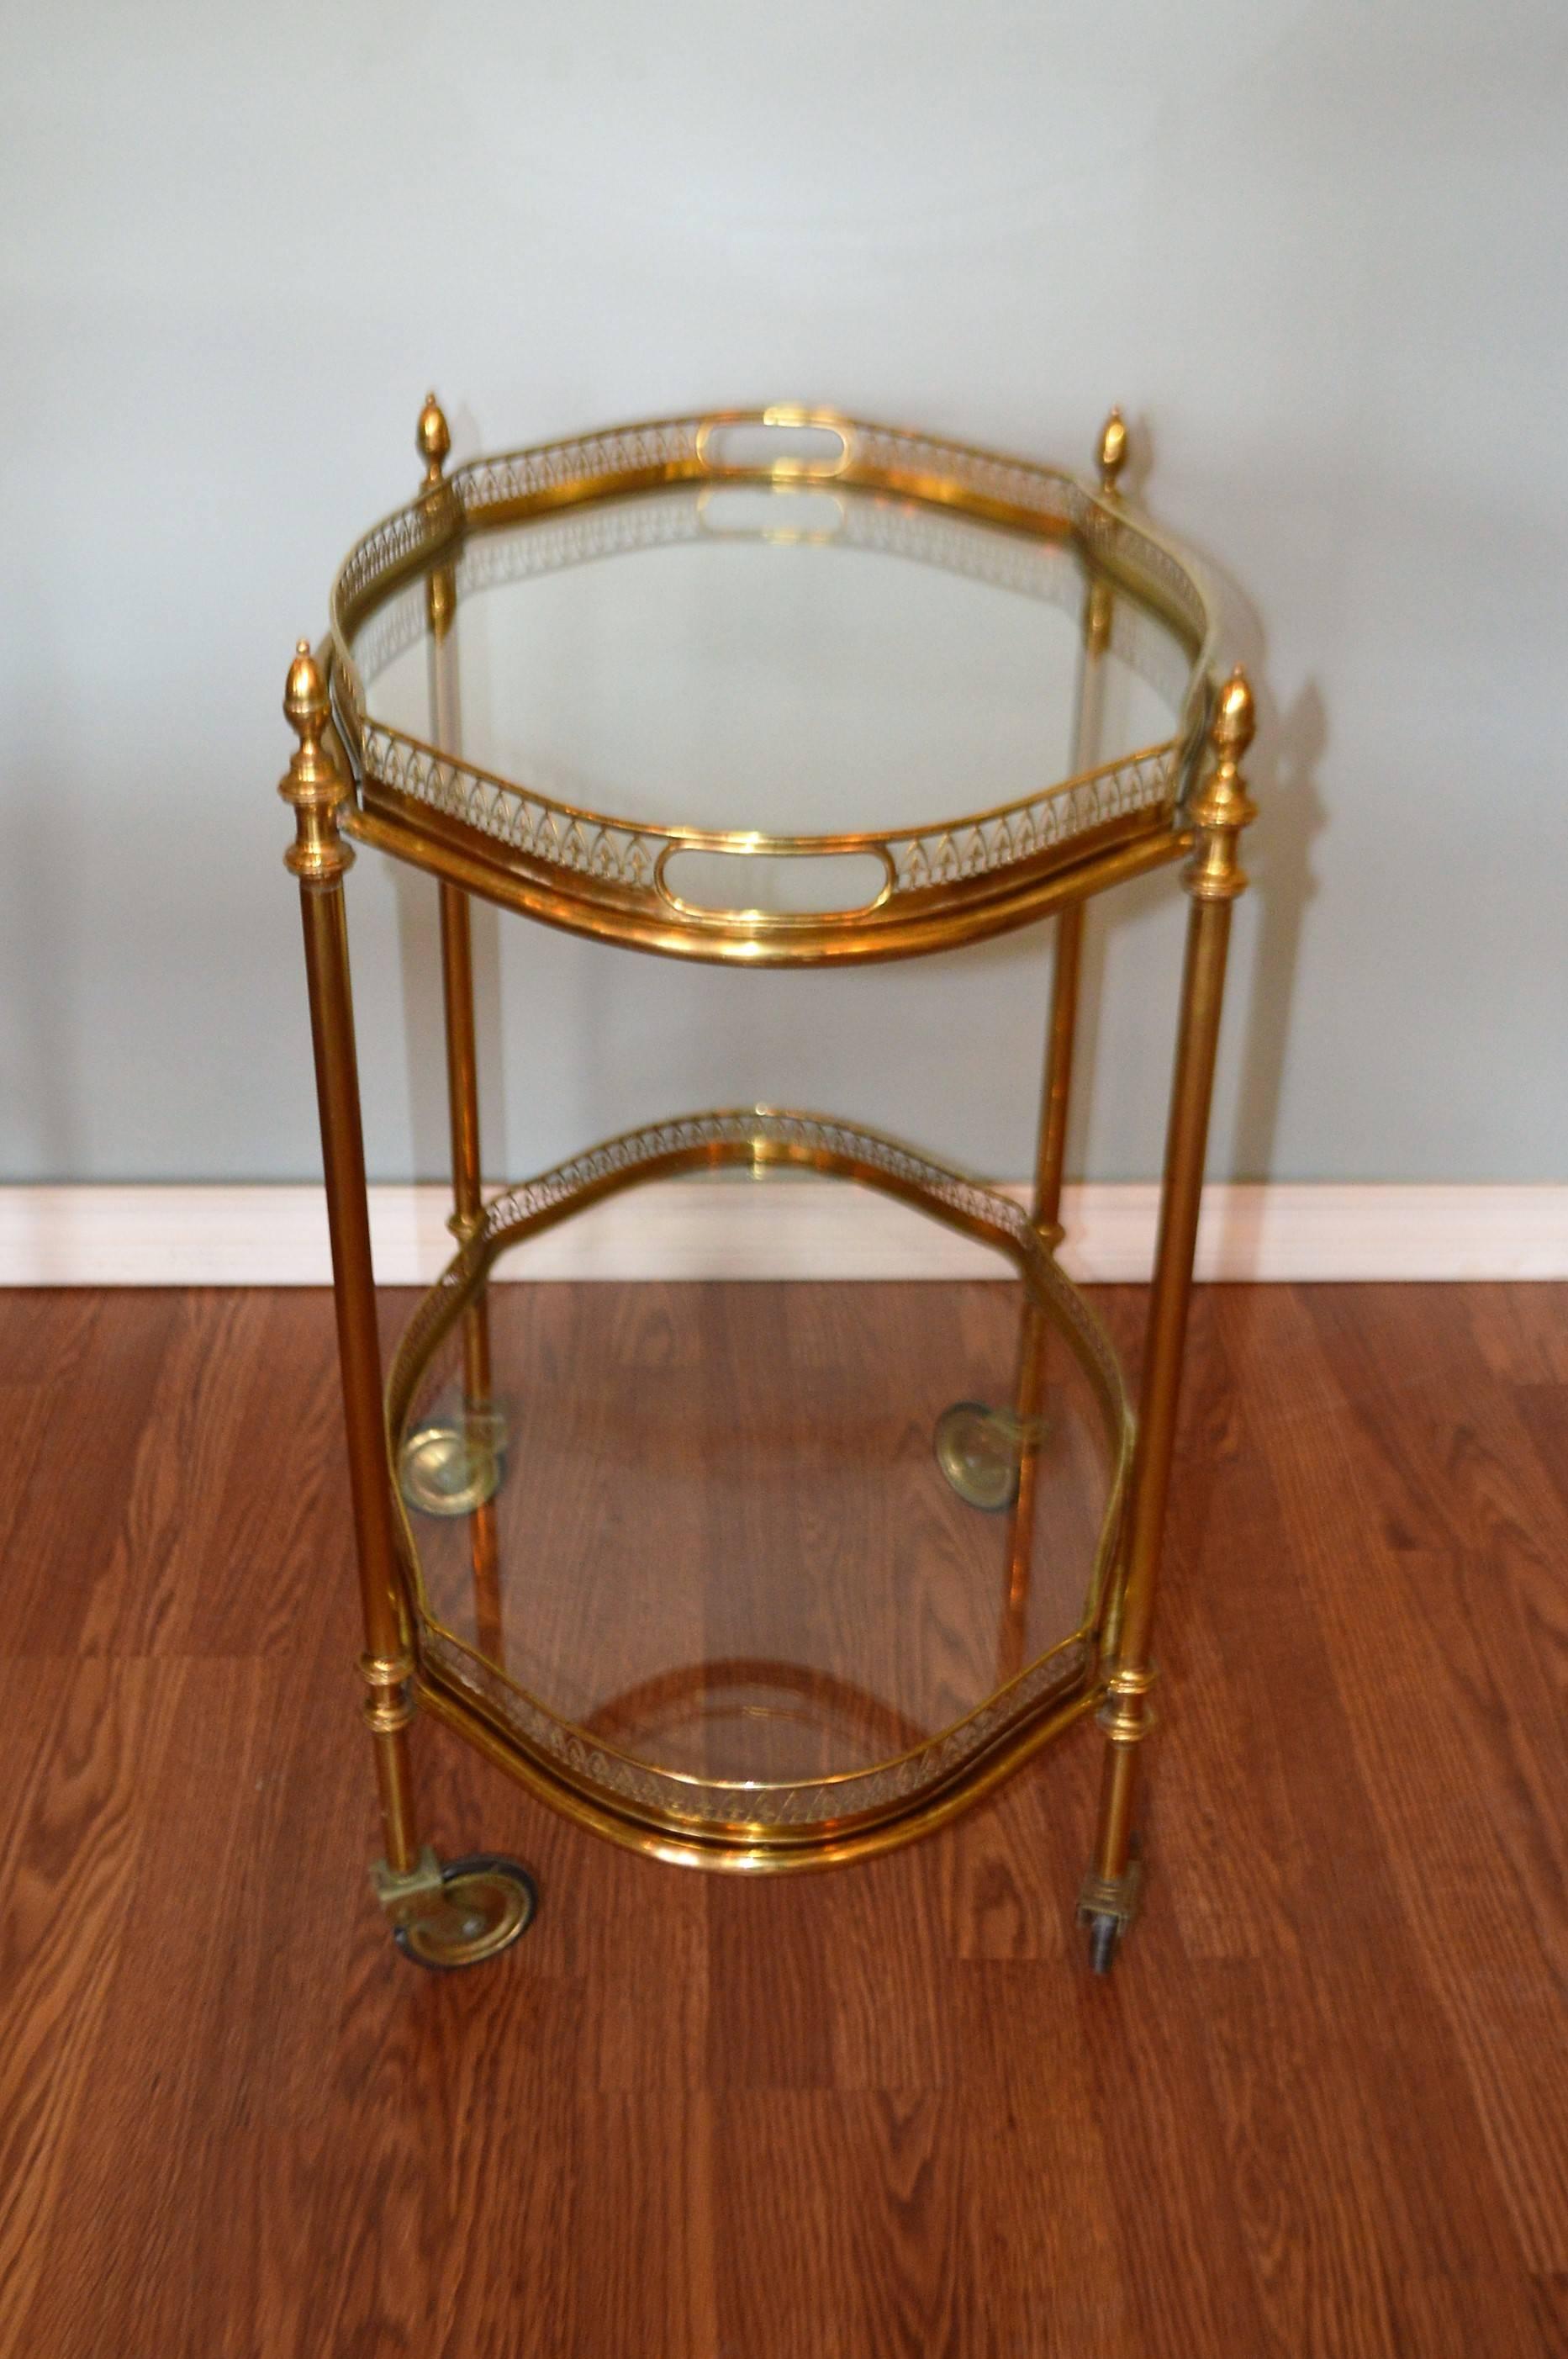 French Mid-Century brass bar cart with two removable trays. Gothic style pierced
galleries around both trays. Cart moves easily on caster wheels.